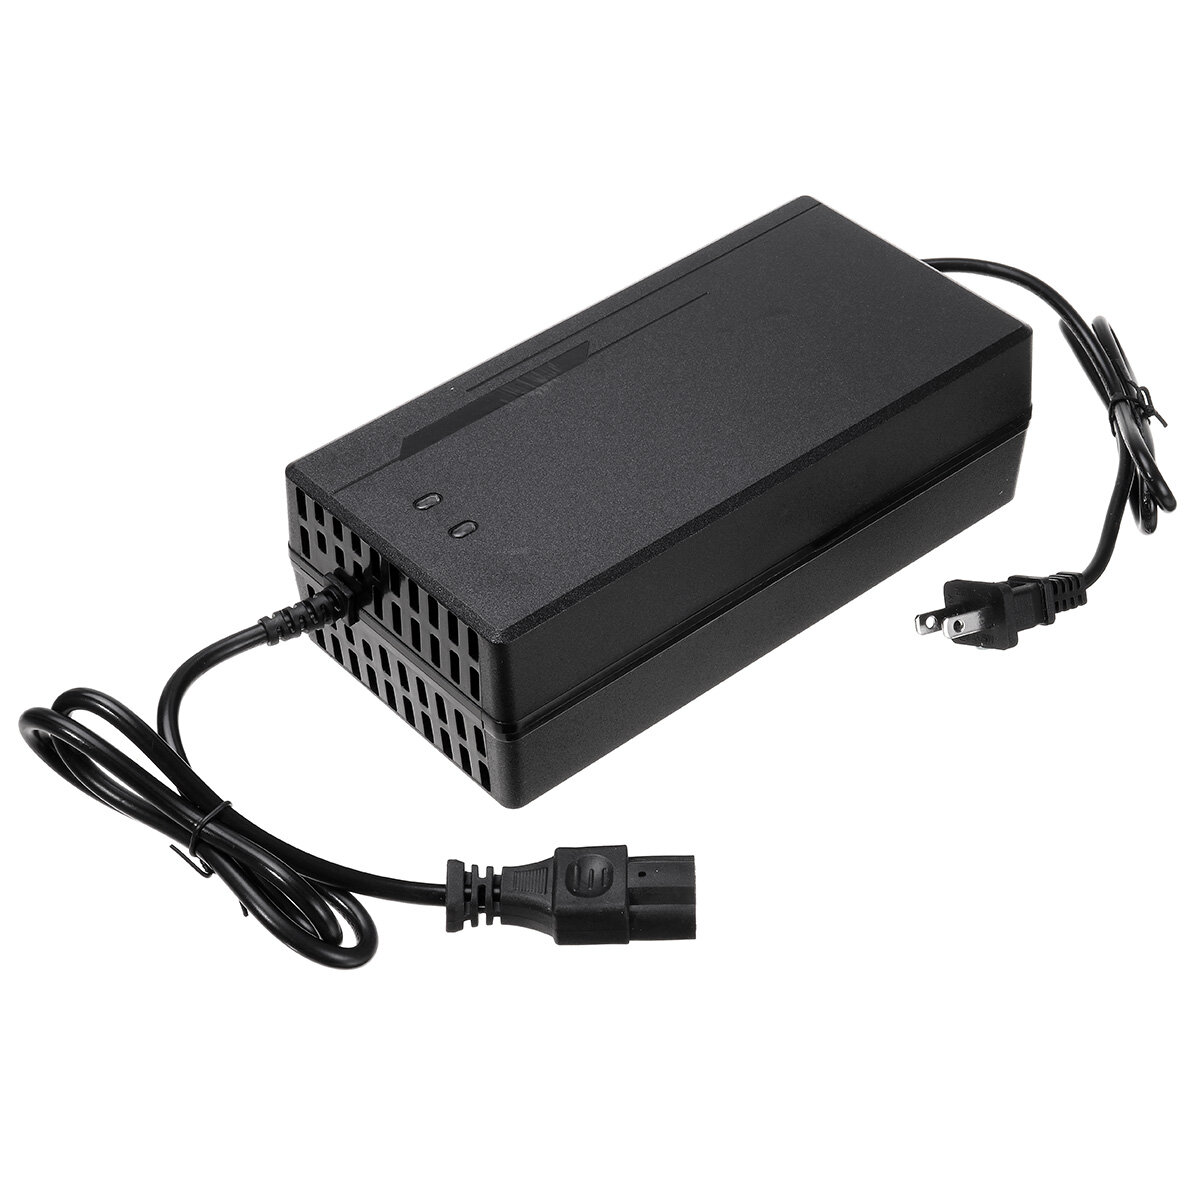 

16S 58.4V 8A Lithium Battery Charger for Electric Motorcycle 48V8A Lithium Battery with 180-220V US Plug T-type Output P